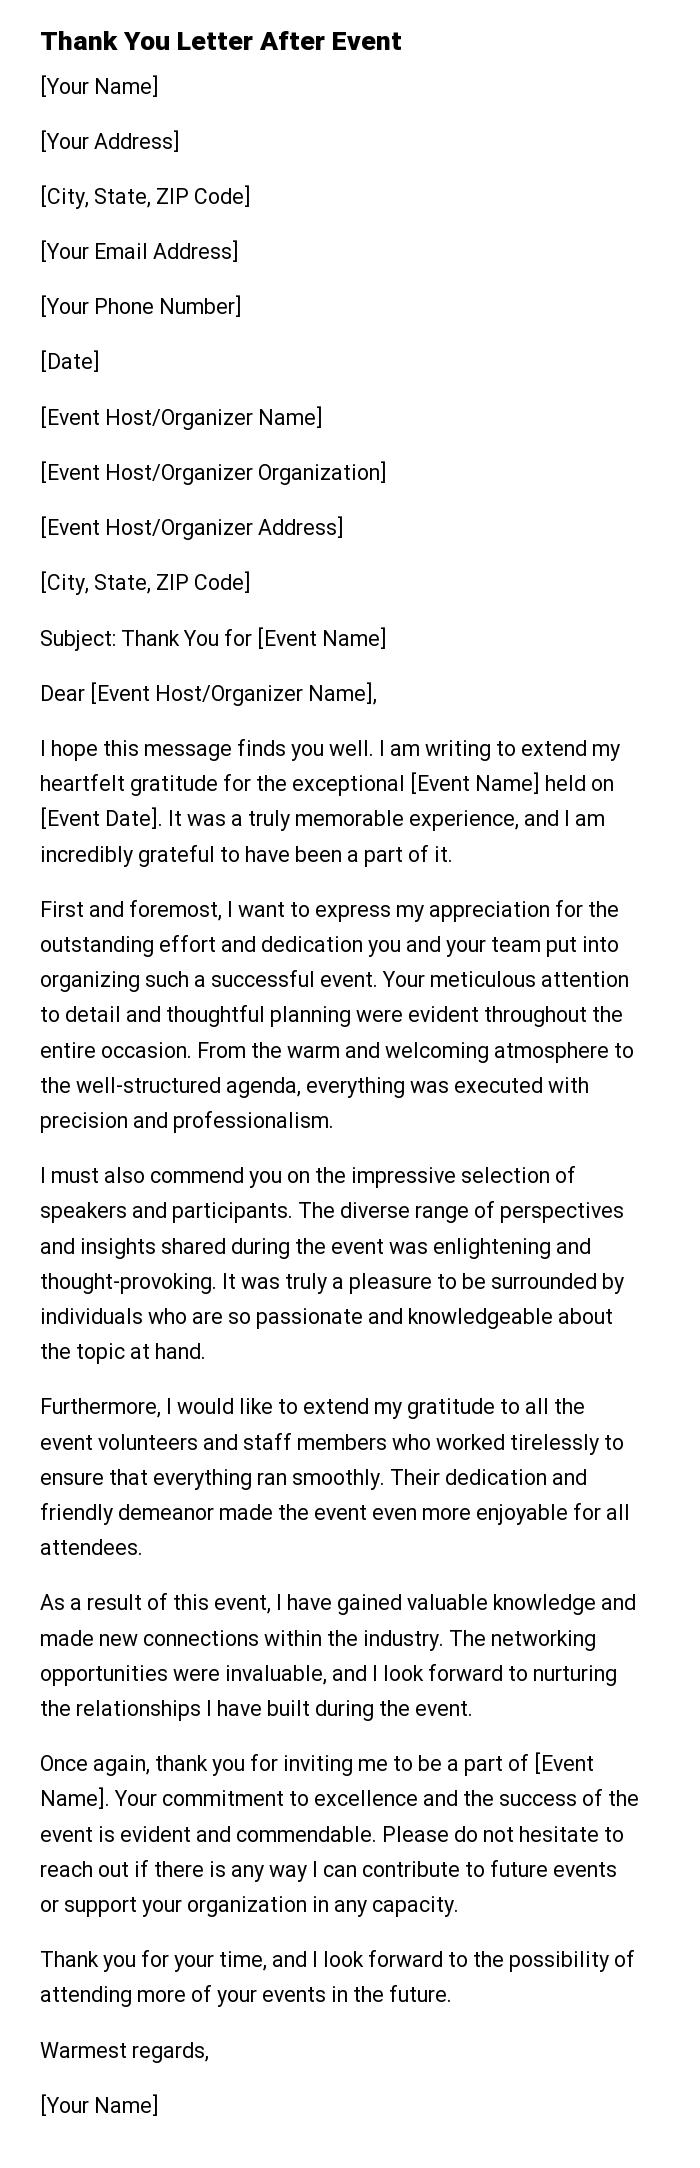 Thank You Letter After Event